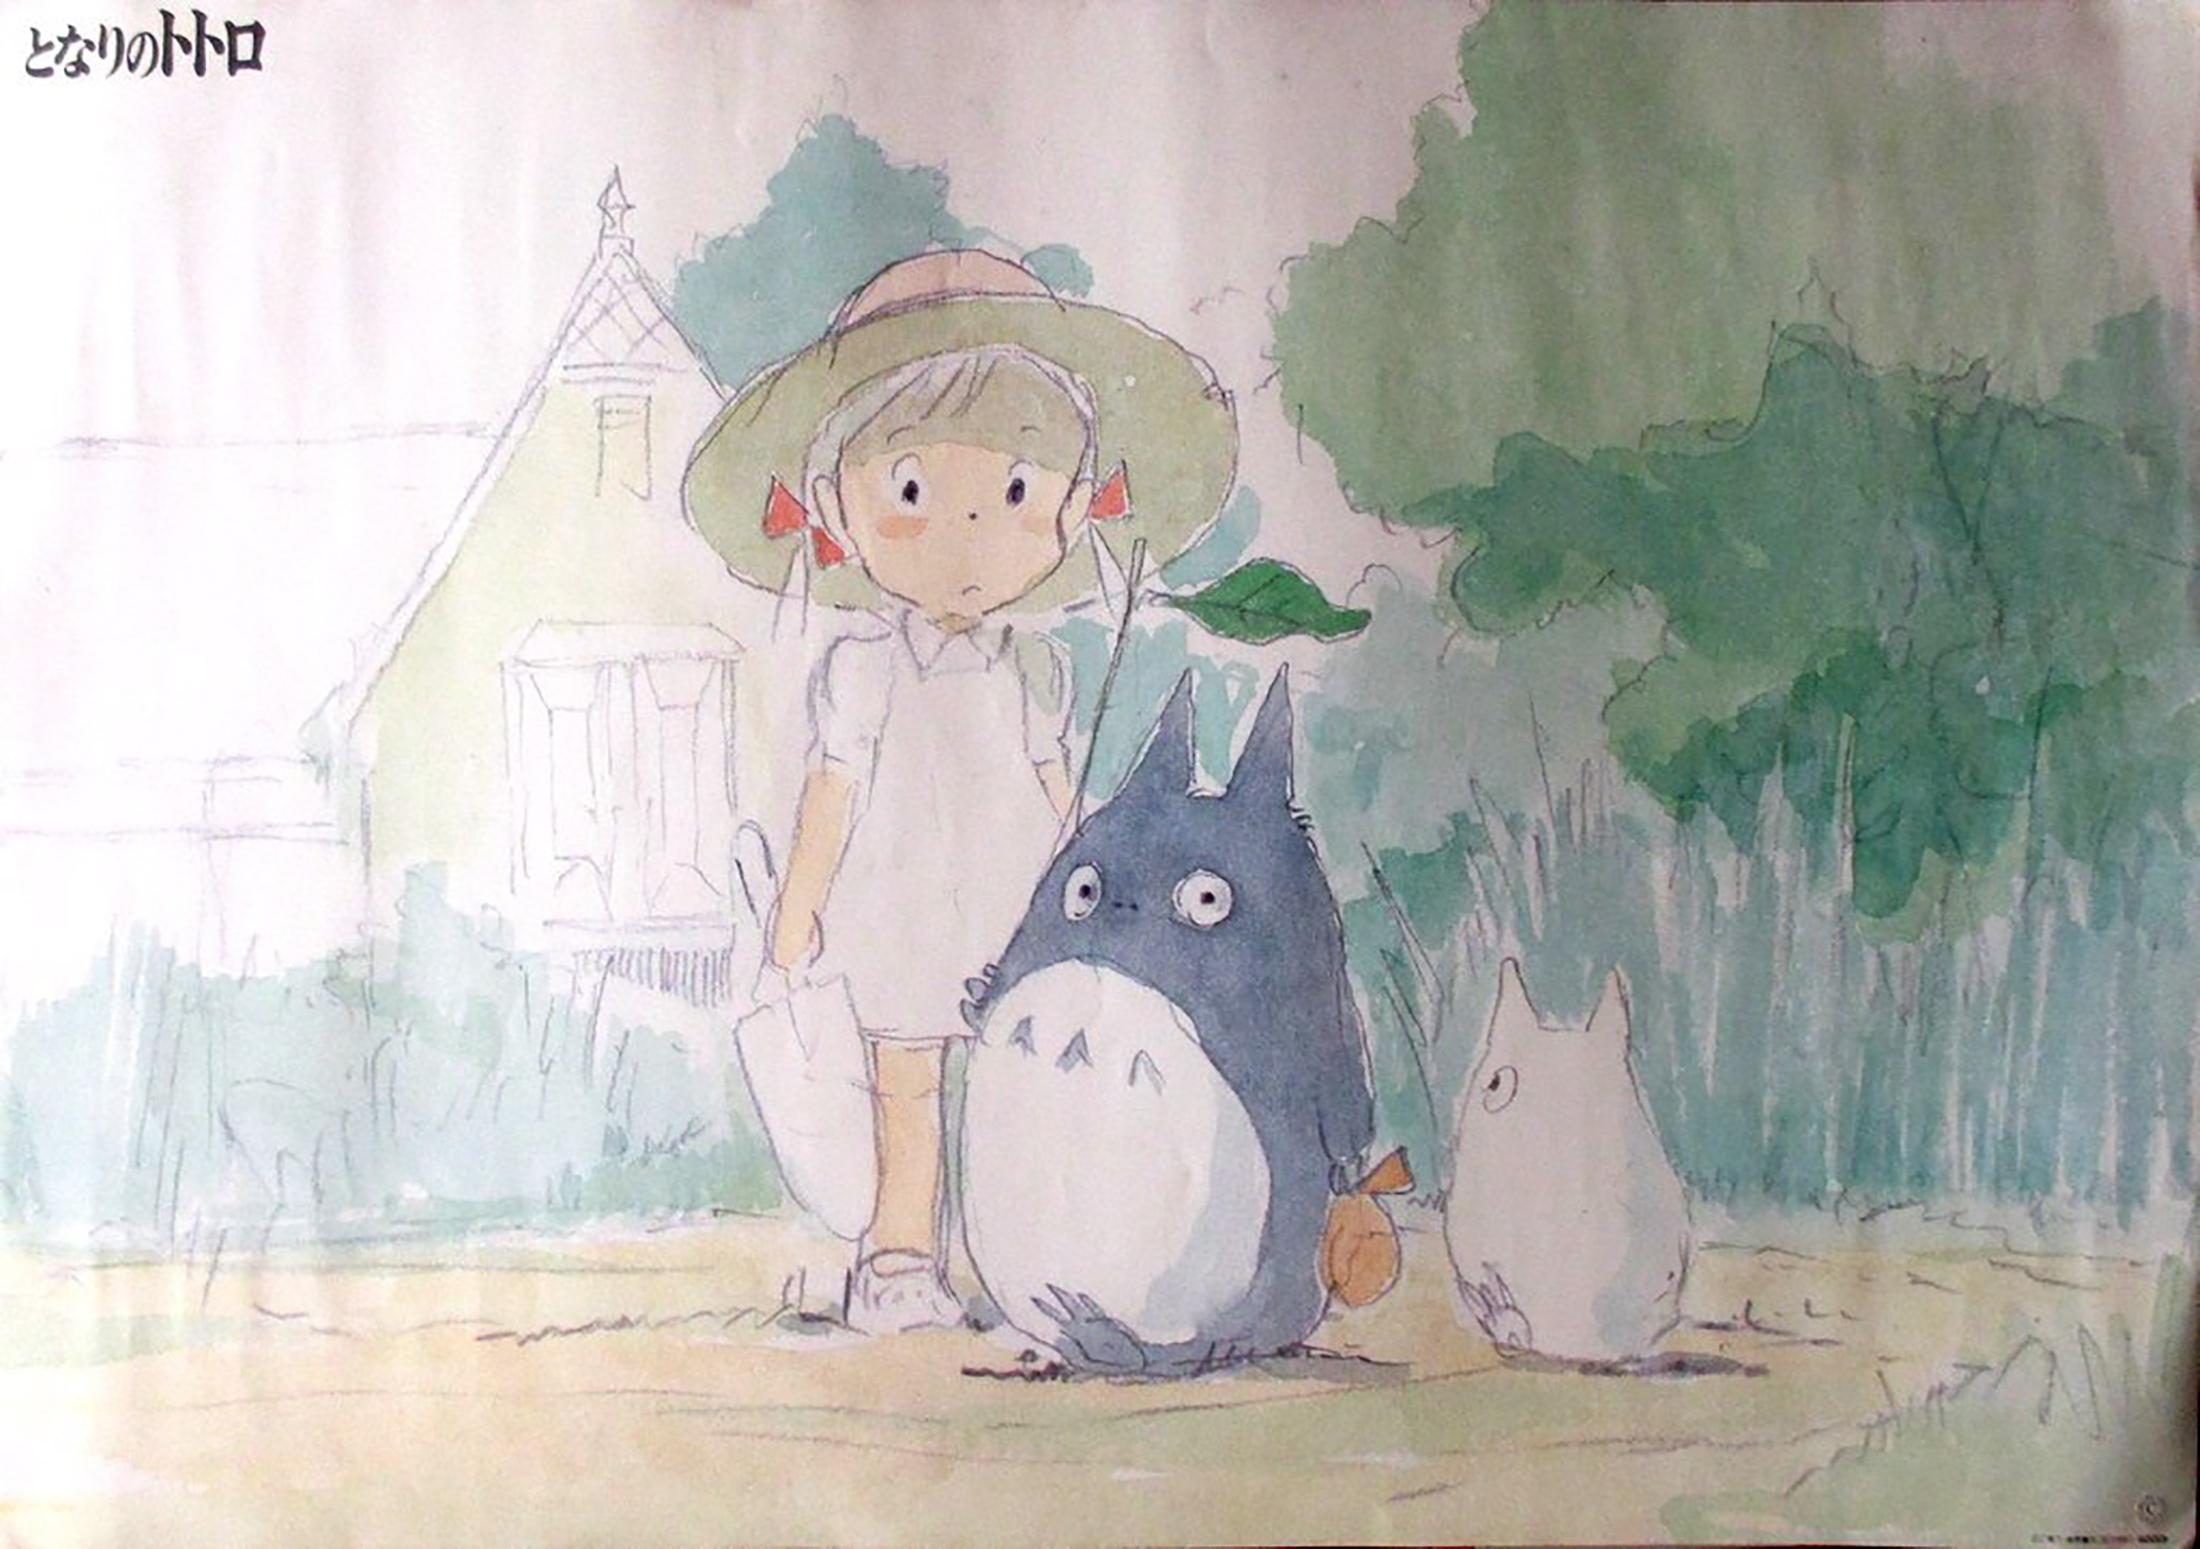 An original vintage poster from Studio Ghibli's 1988 production My Neighbor Totoro, written and directed by the acclaimed Hayao Miyazaki.

The plot follows two young girls Satsuki and Mei as they and their father move to a small town in the country,